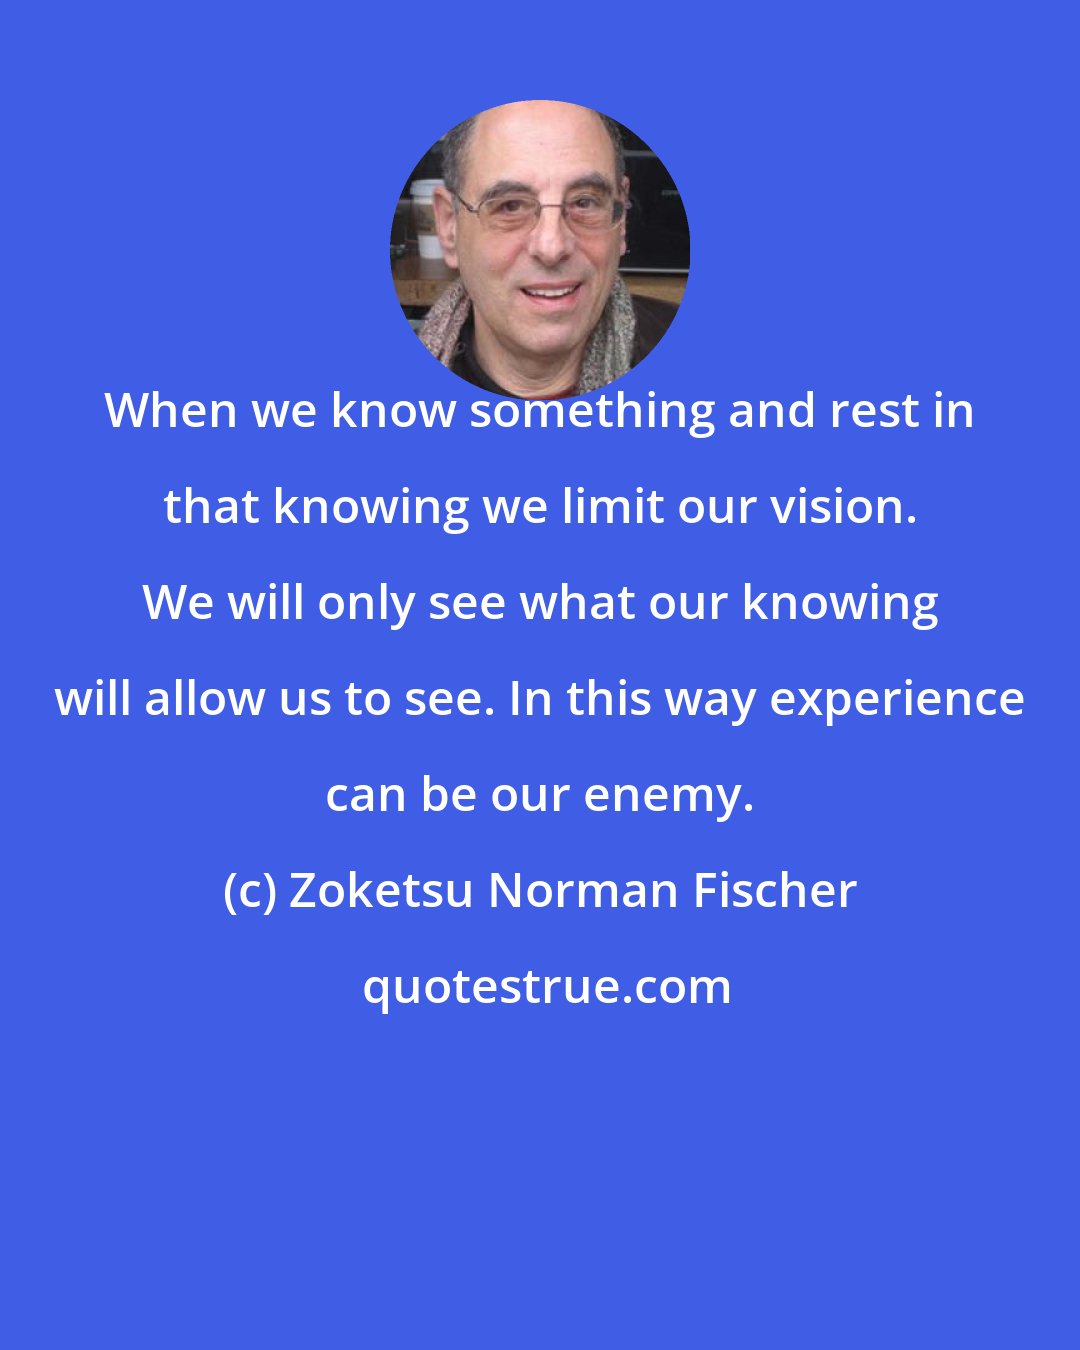 Zoketsu Norman Fischer: When we know something and rest in that knowing we limit our vision. We will only see what our knowing will allow us to see. In this way experience can be our enemy.